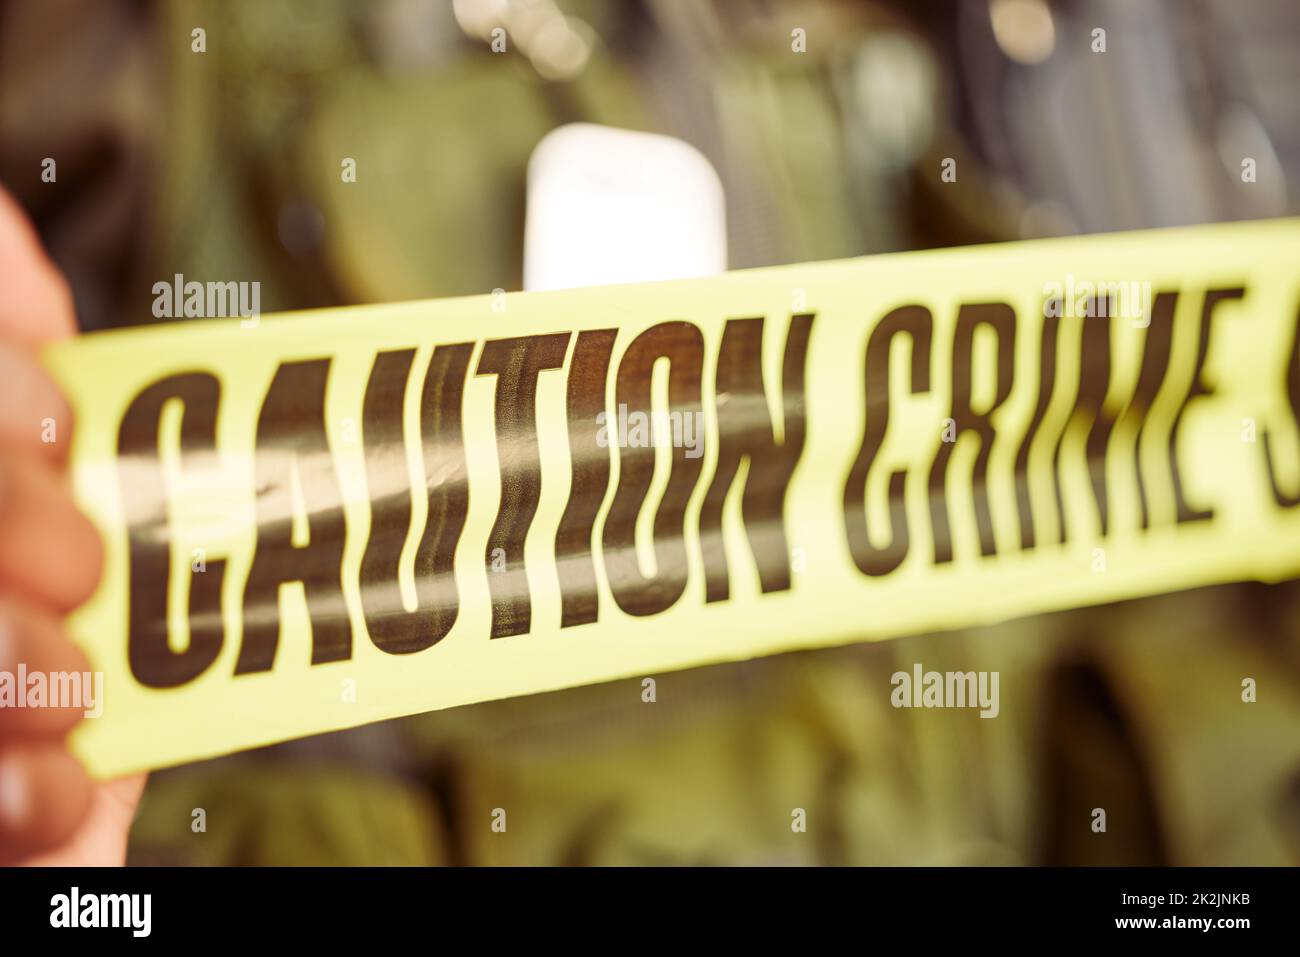 Well take care of this from here. Shot of caution tape surrounding a crime scene. Stock Photo